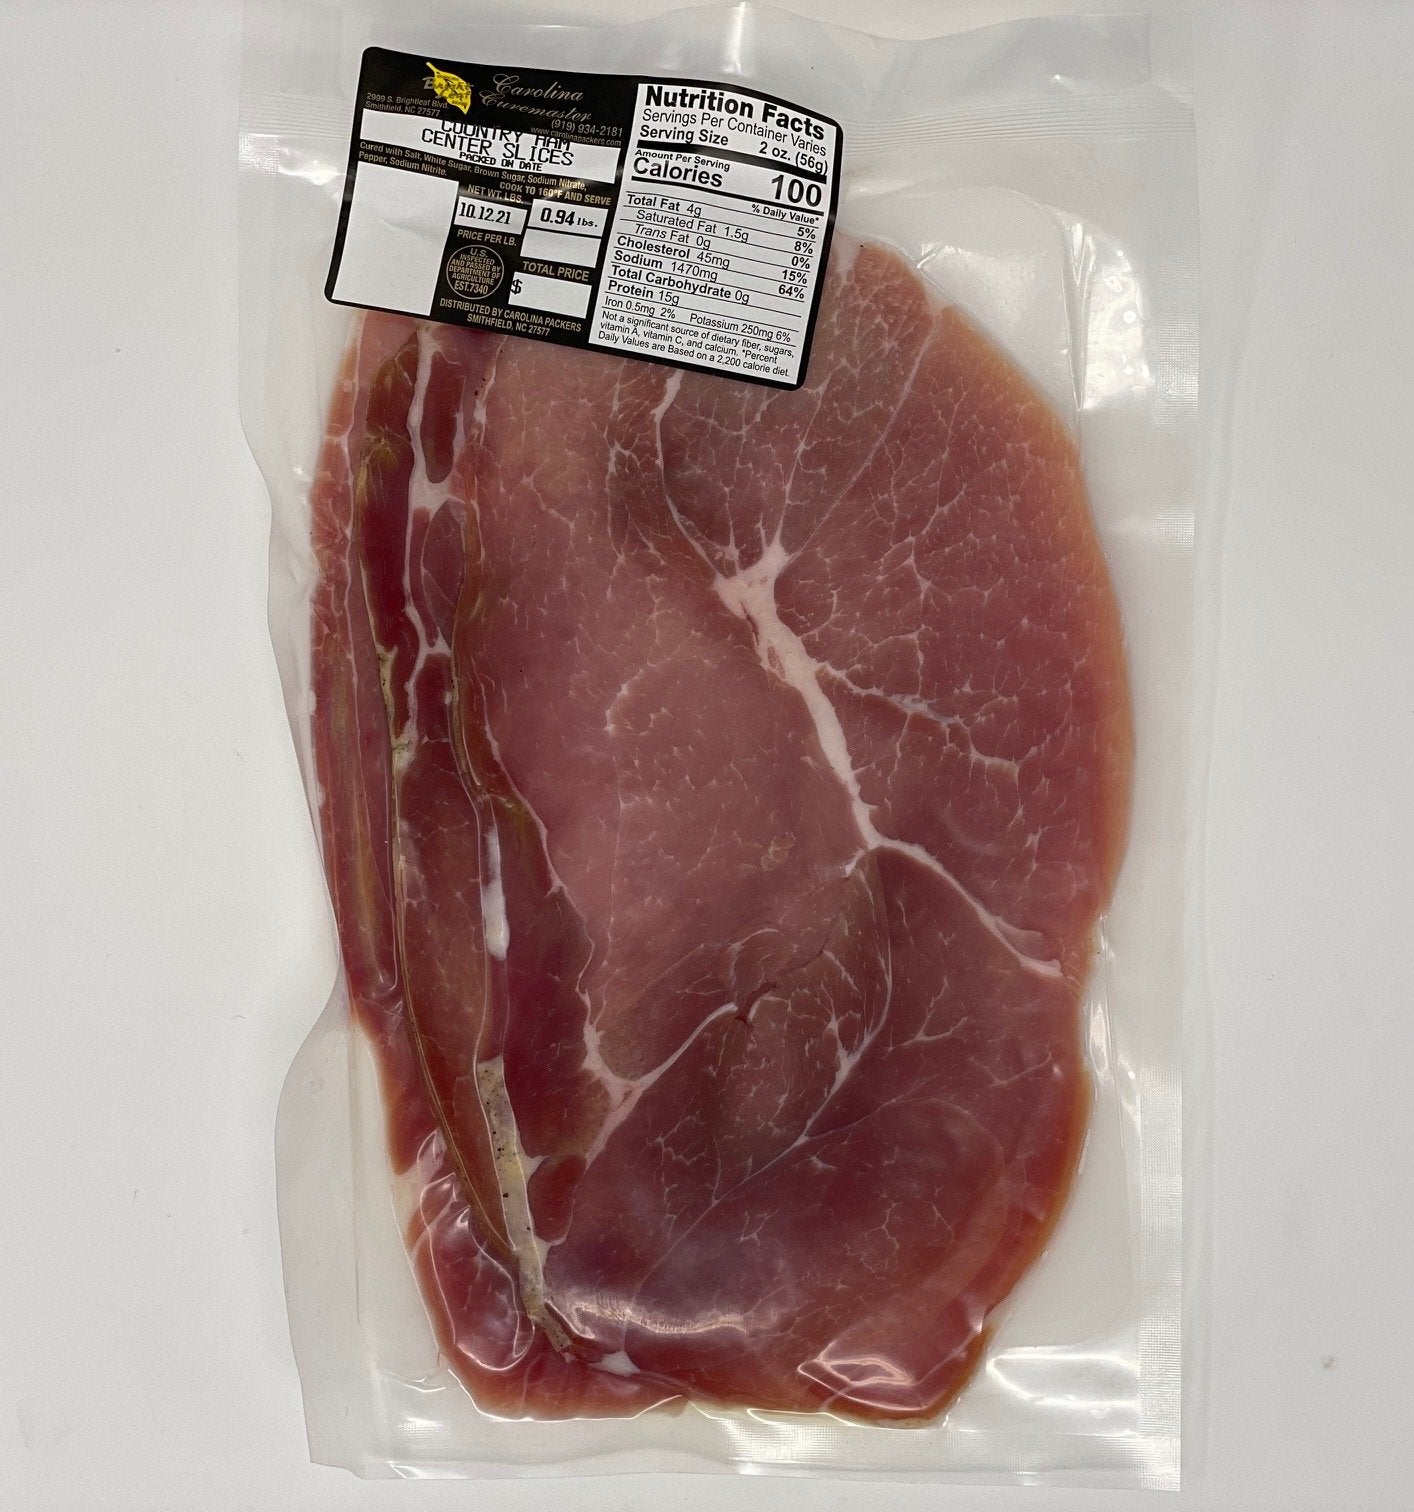 Country Ham Center Cut Slices